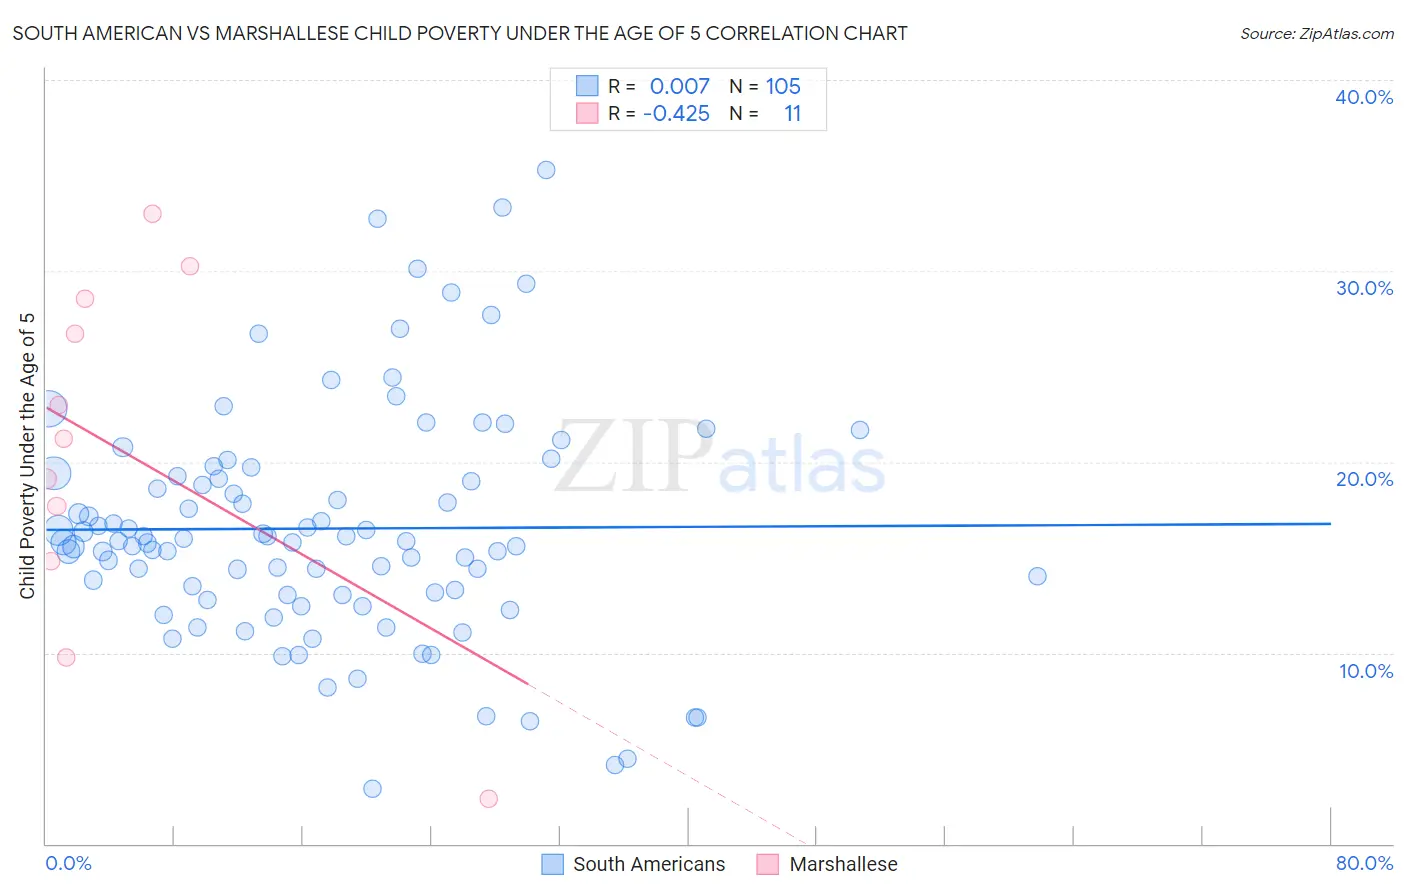 South American vs Marshallese Child Poverty Under the Age of 5